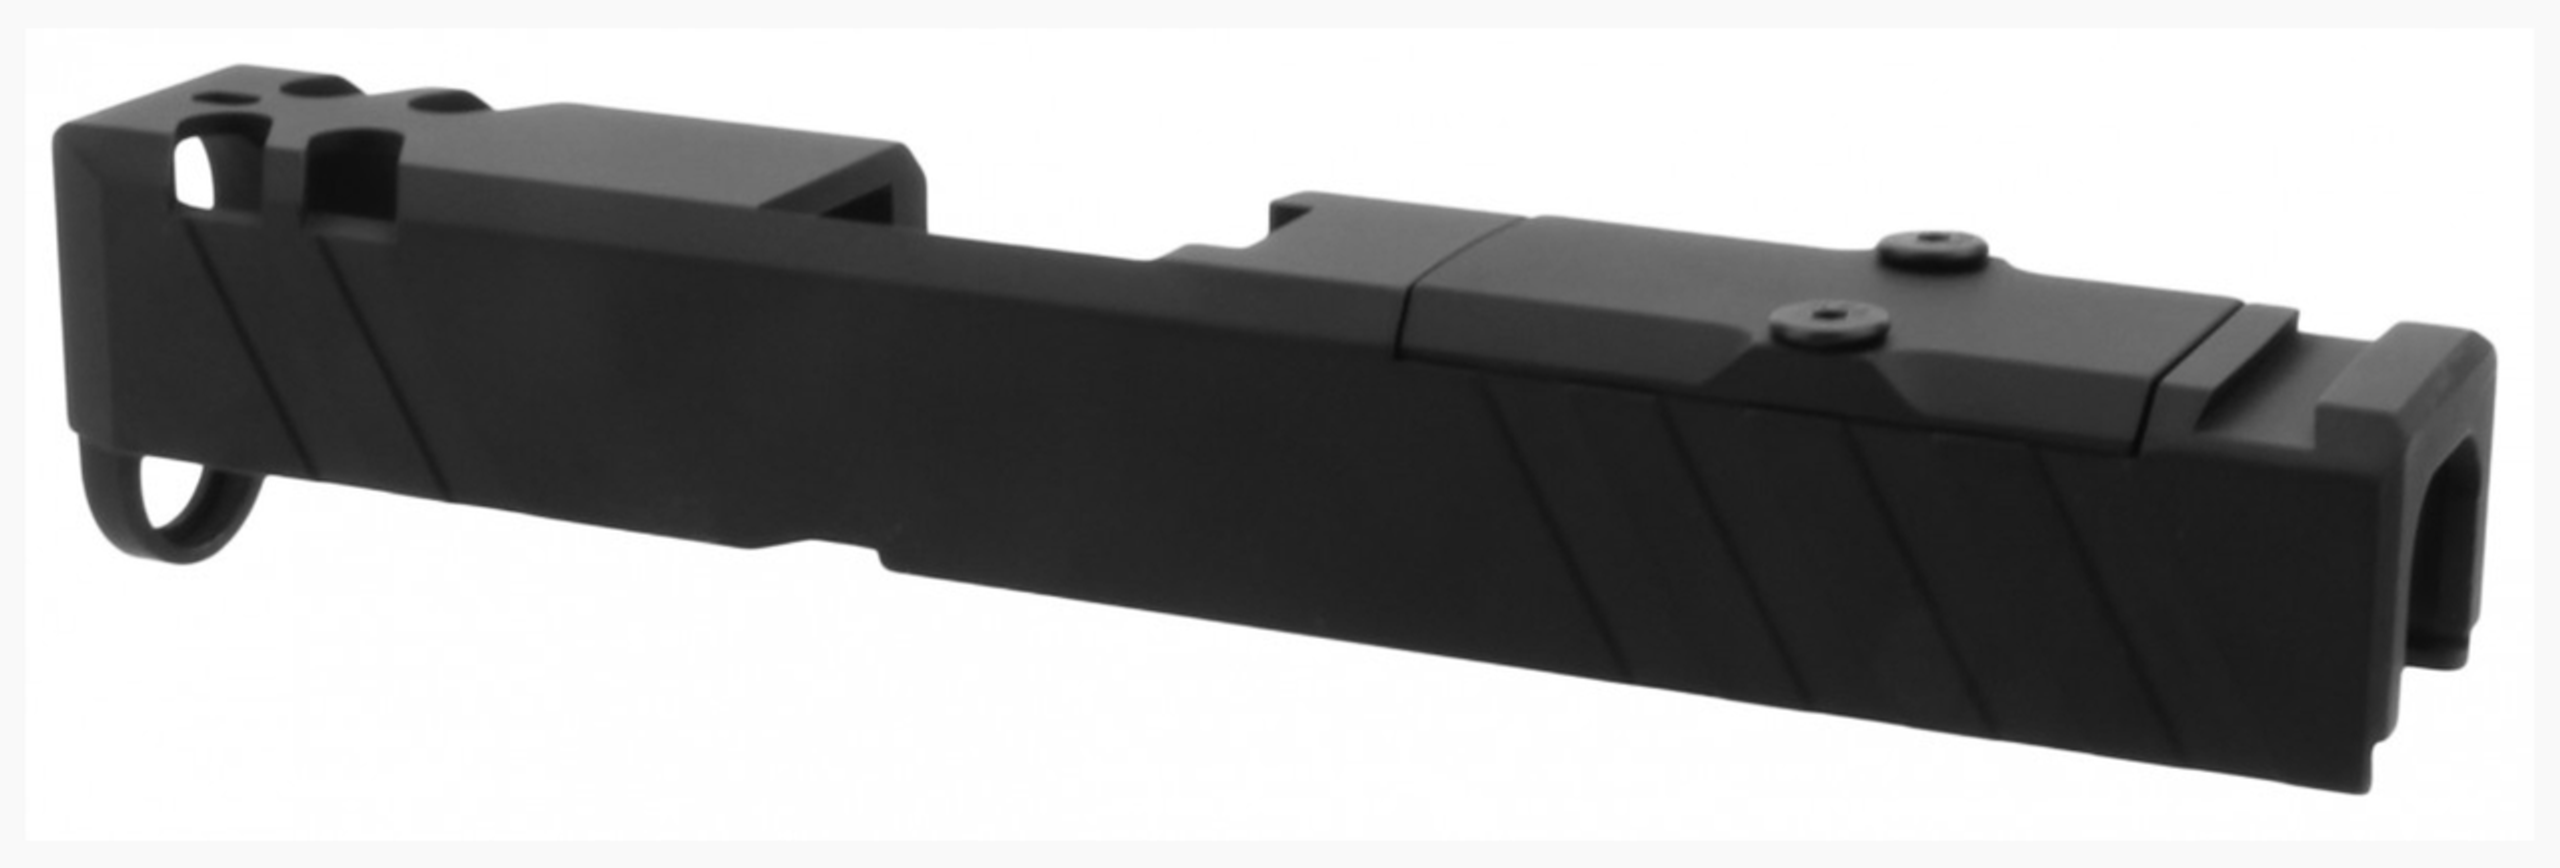 Rmr Optic Ready Glock 26 9mm Slide With Rmr Cover Plate Slide Parts